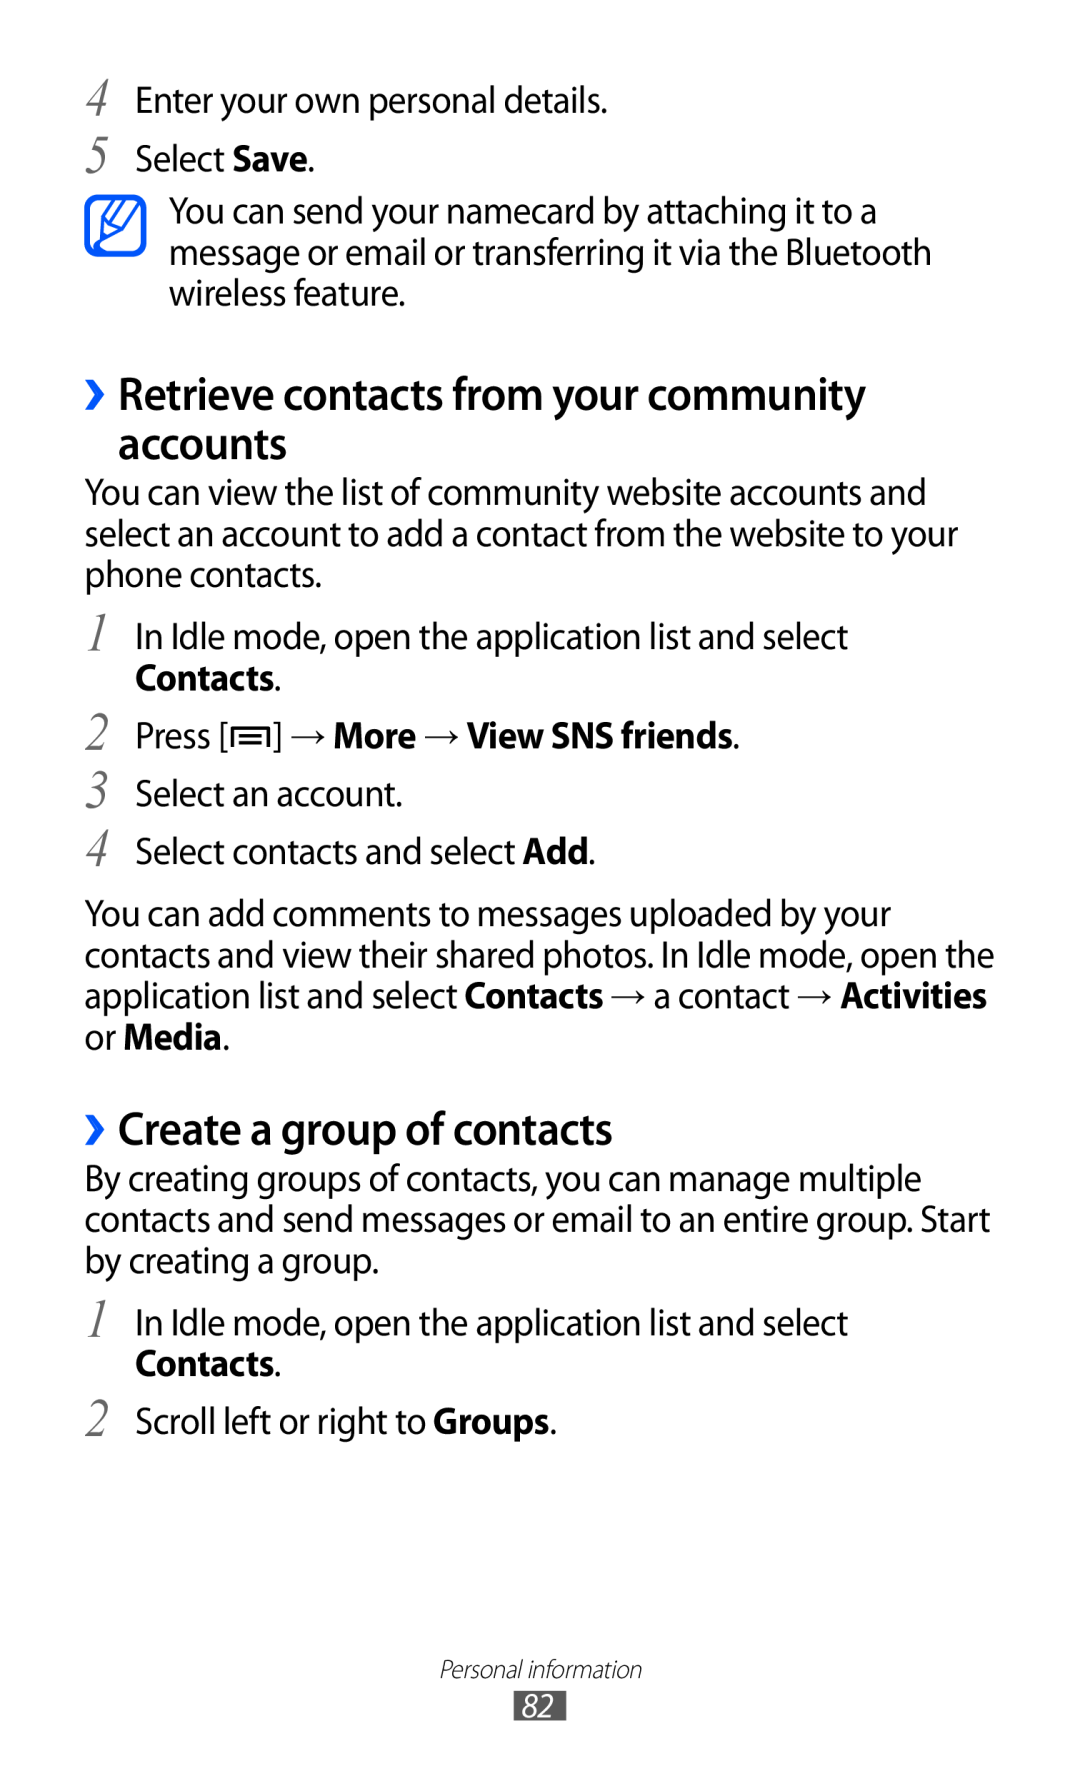 Samsung GT-I9070 user manual ››Retrieve contacts from your community accounts, ››Create a group of contacts 